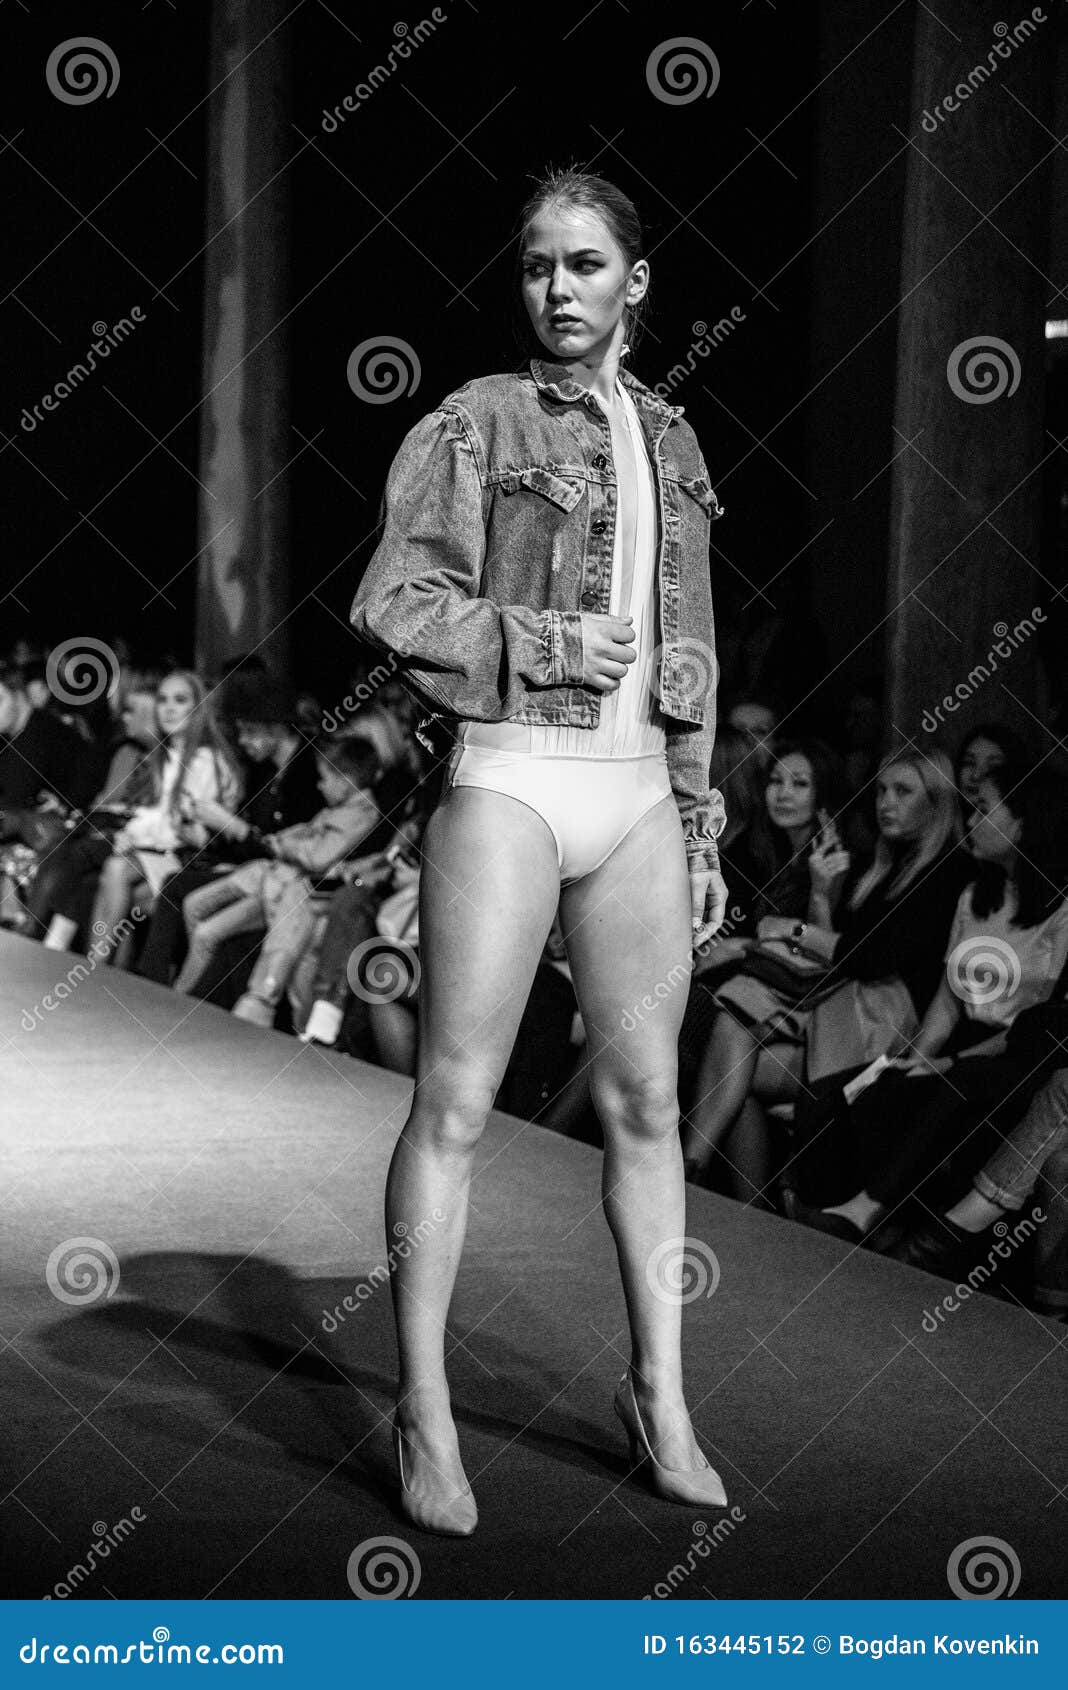 udsultet frill pizza 712 Sexy Models Catwalk Photos - Free & Royalty-Free Stock Photos from  Dreamstime